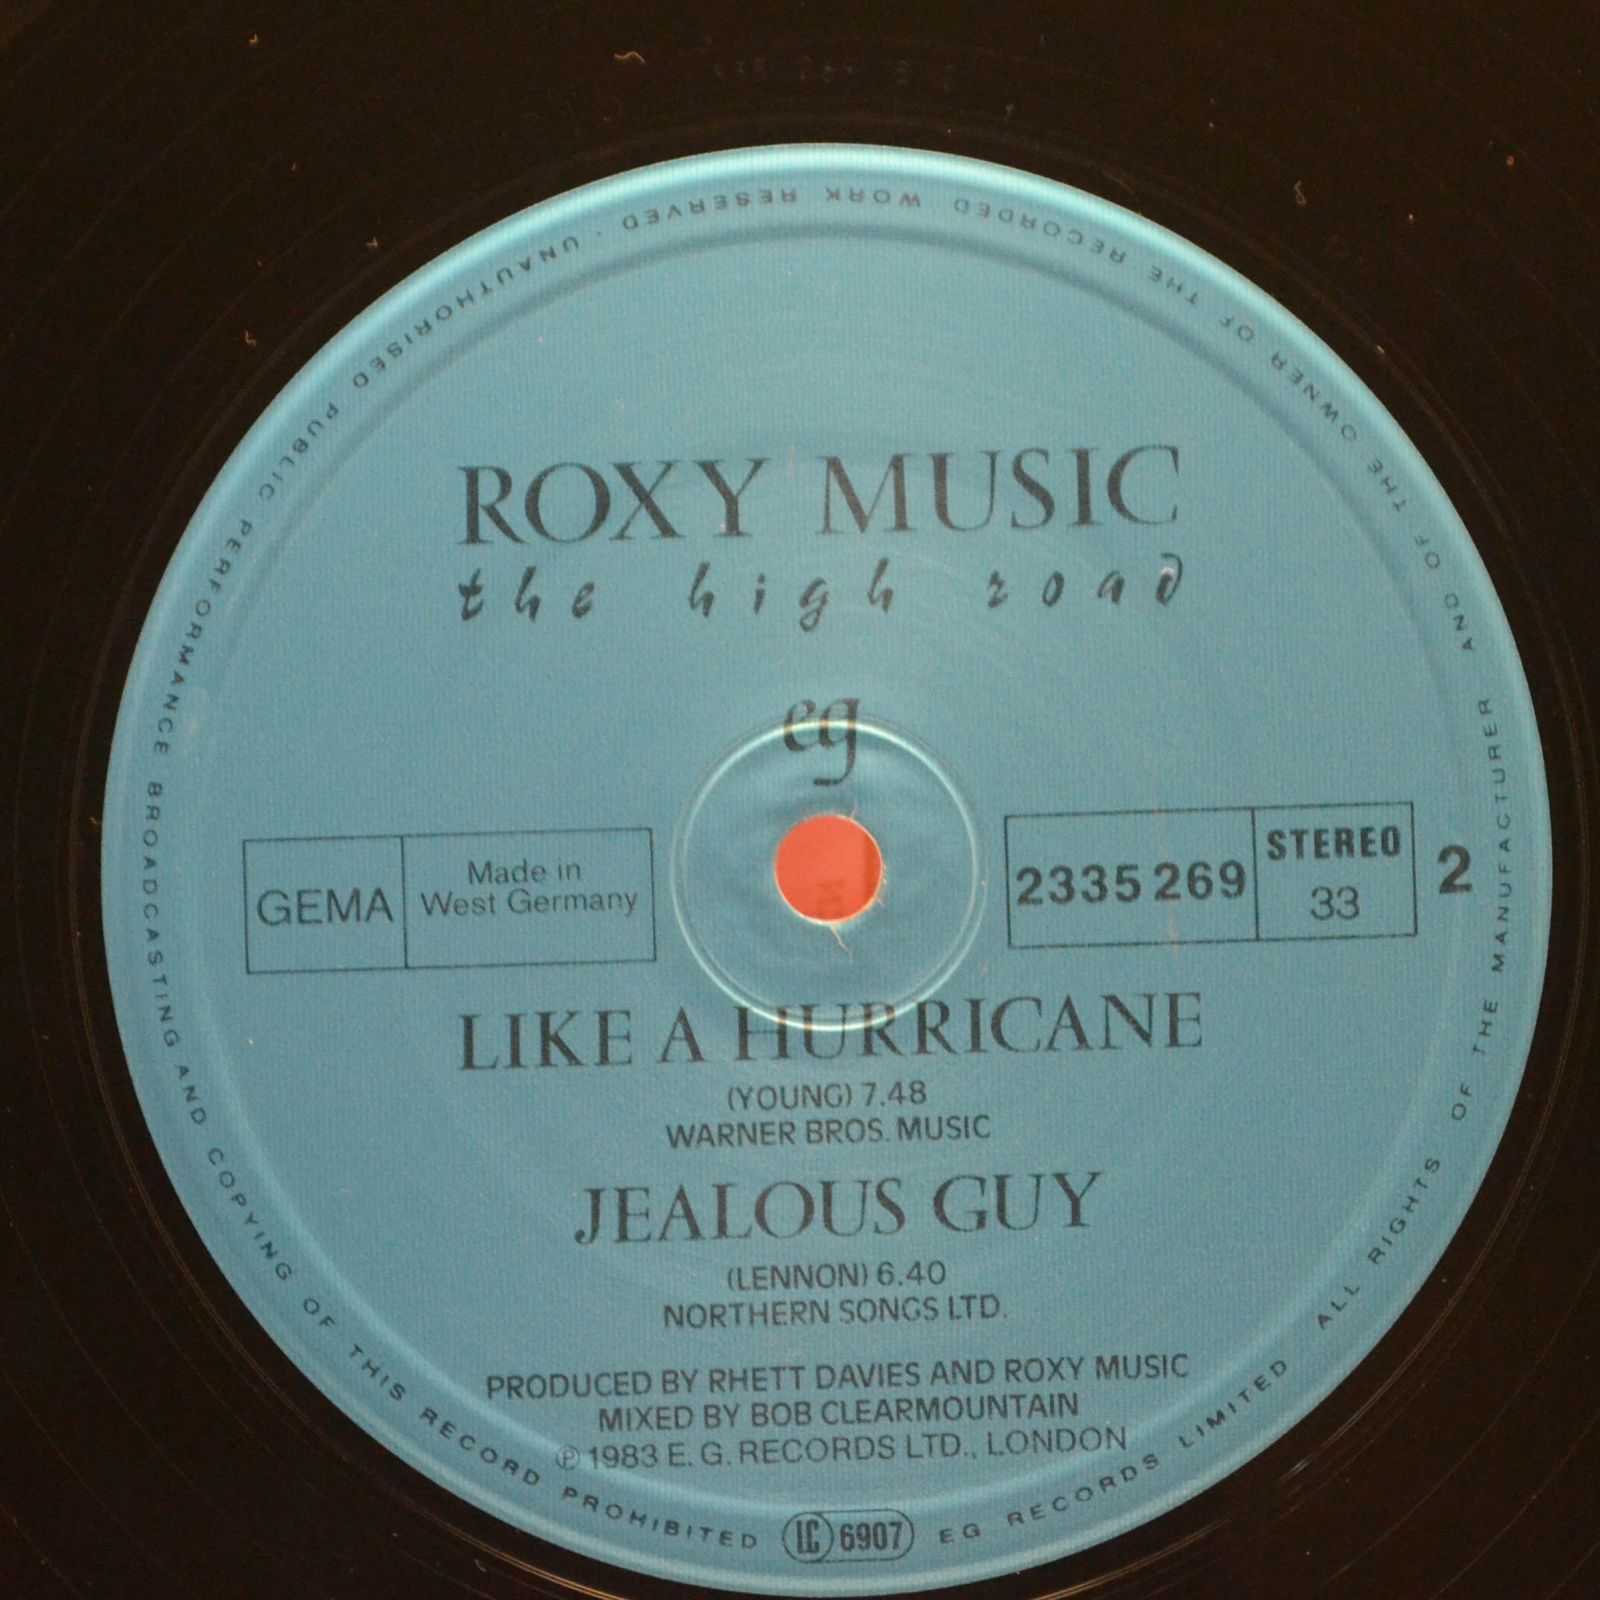 Roxy Music — The High Road, 1983